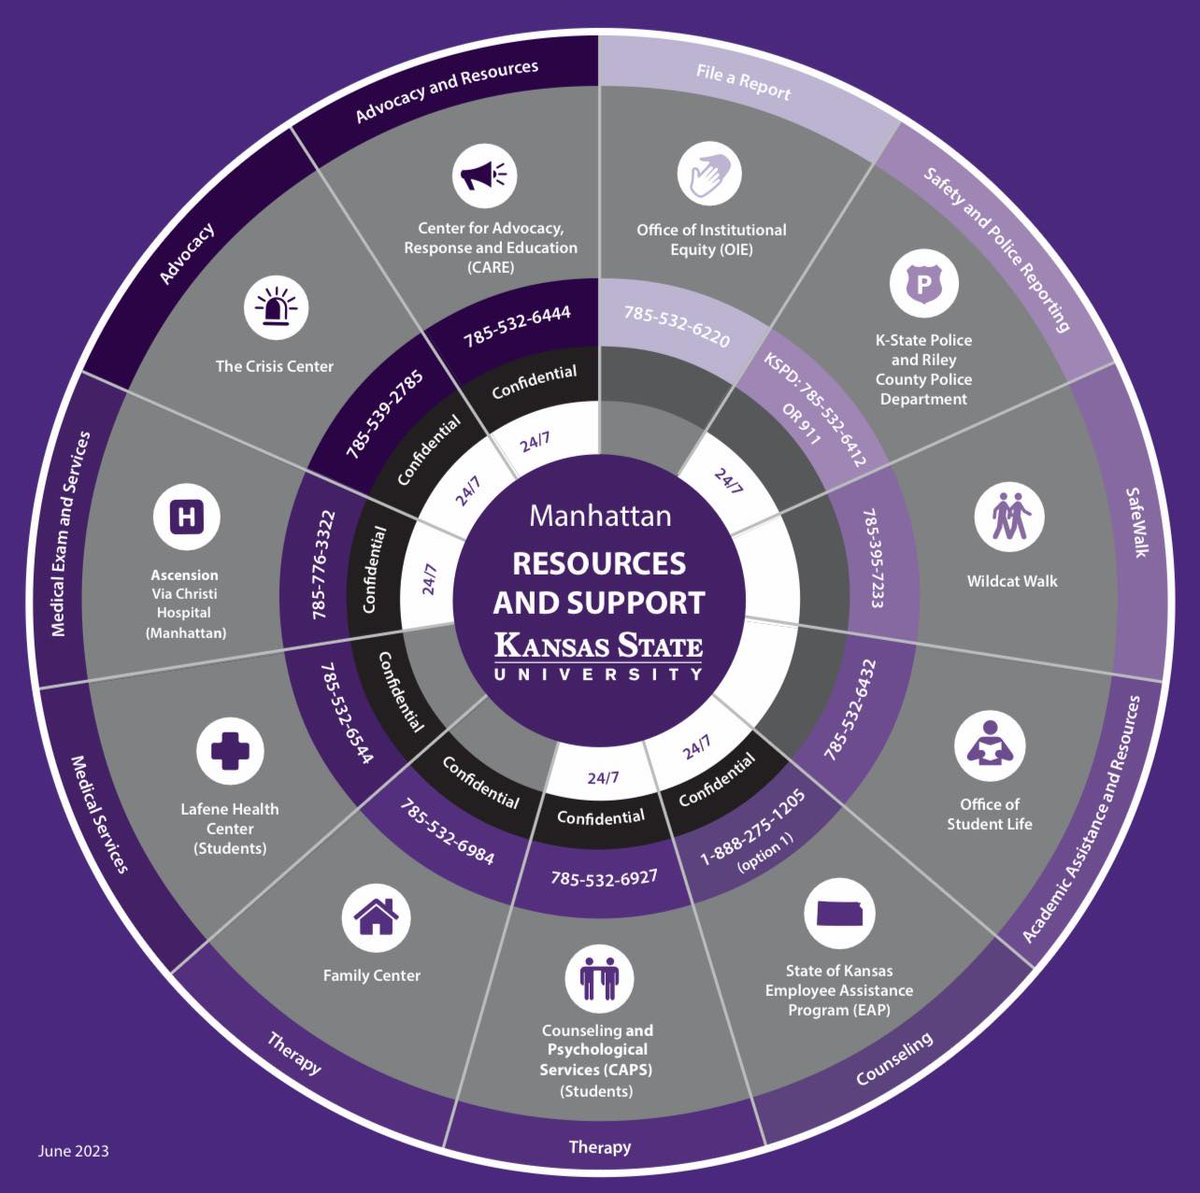 Welcome back, Wildcat students! Life gets busy and we want you to have resources ready. Our department is dedicated to the safety of our students here at Kansas State University. Below you will find the resources and support wheel for the Manhattan campus.